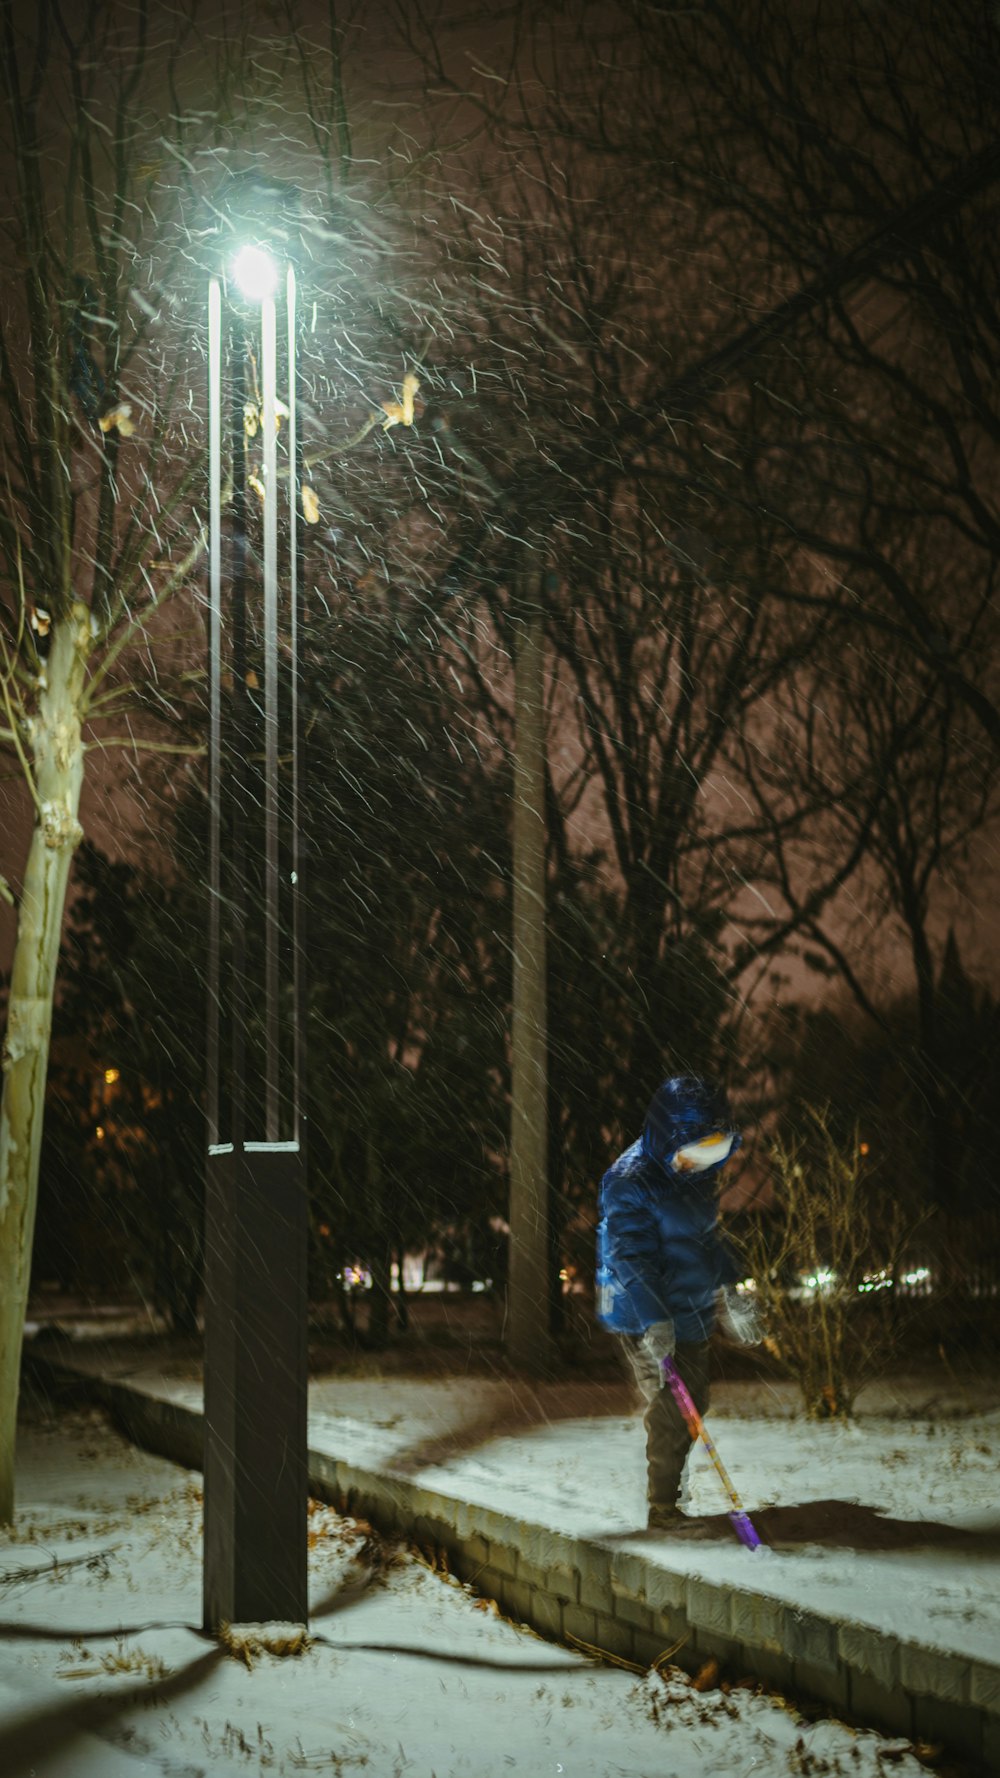 a person in a blue jacket is playing in the snow